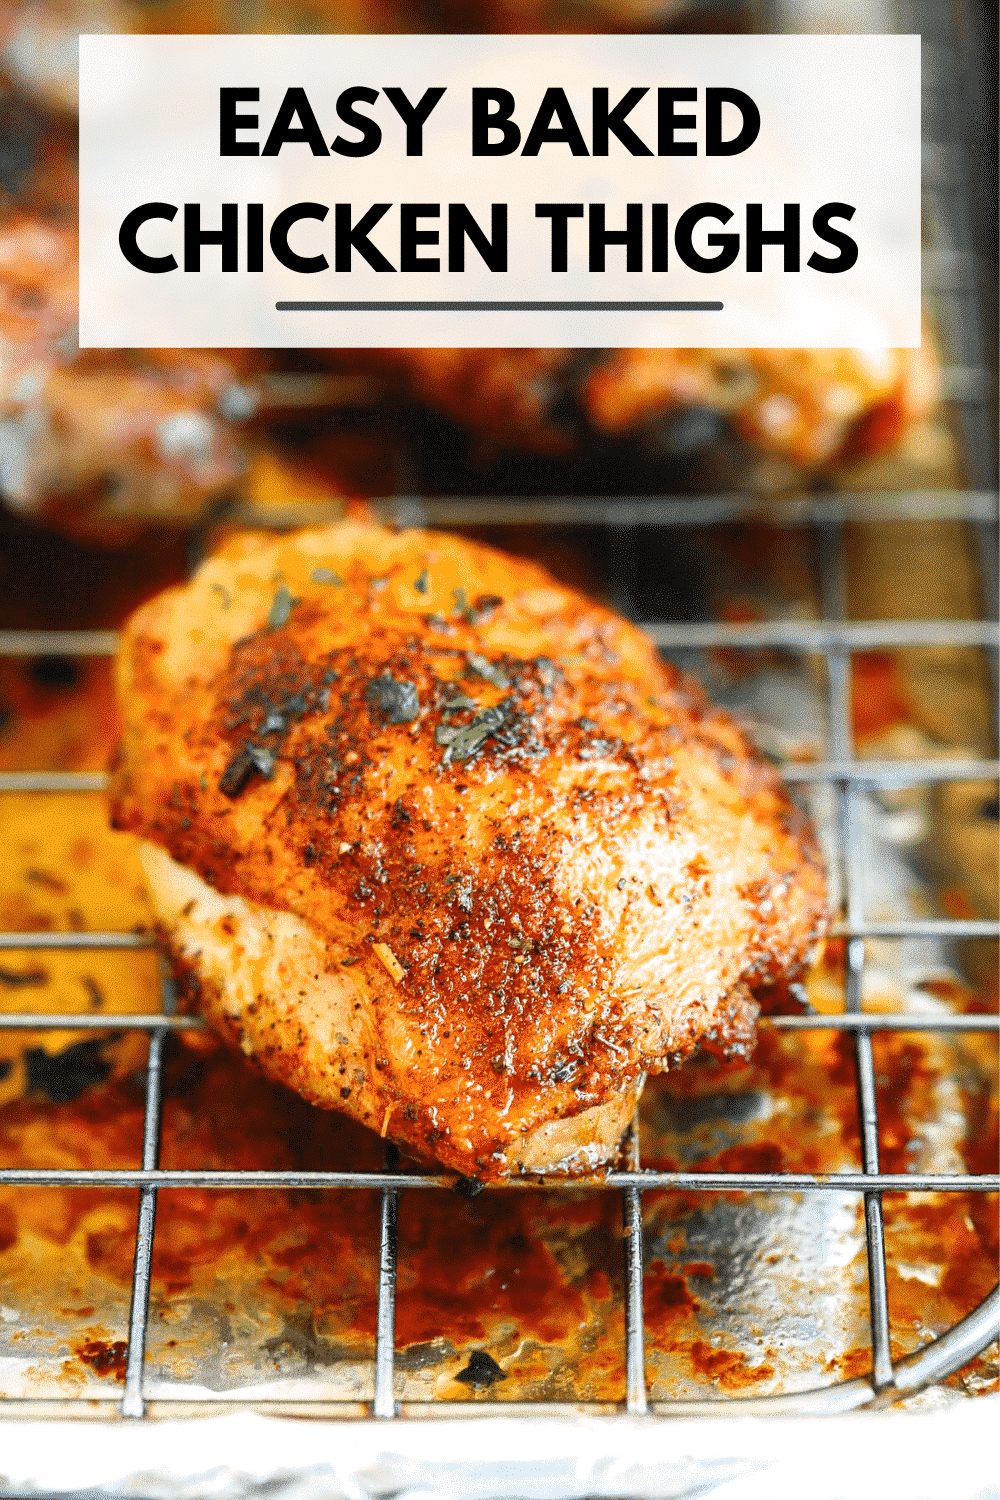 EASY BAKED CHICKEN THIGHS